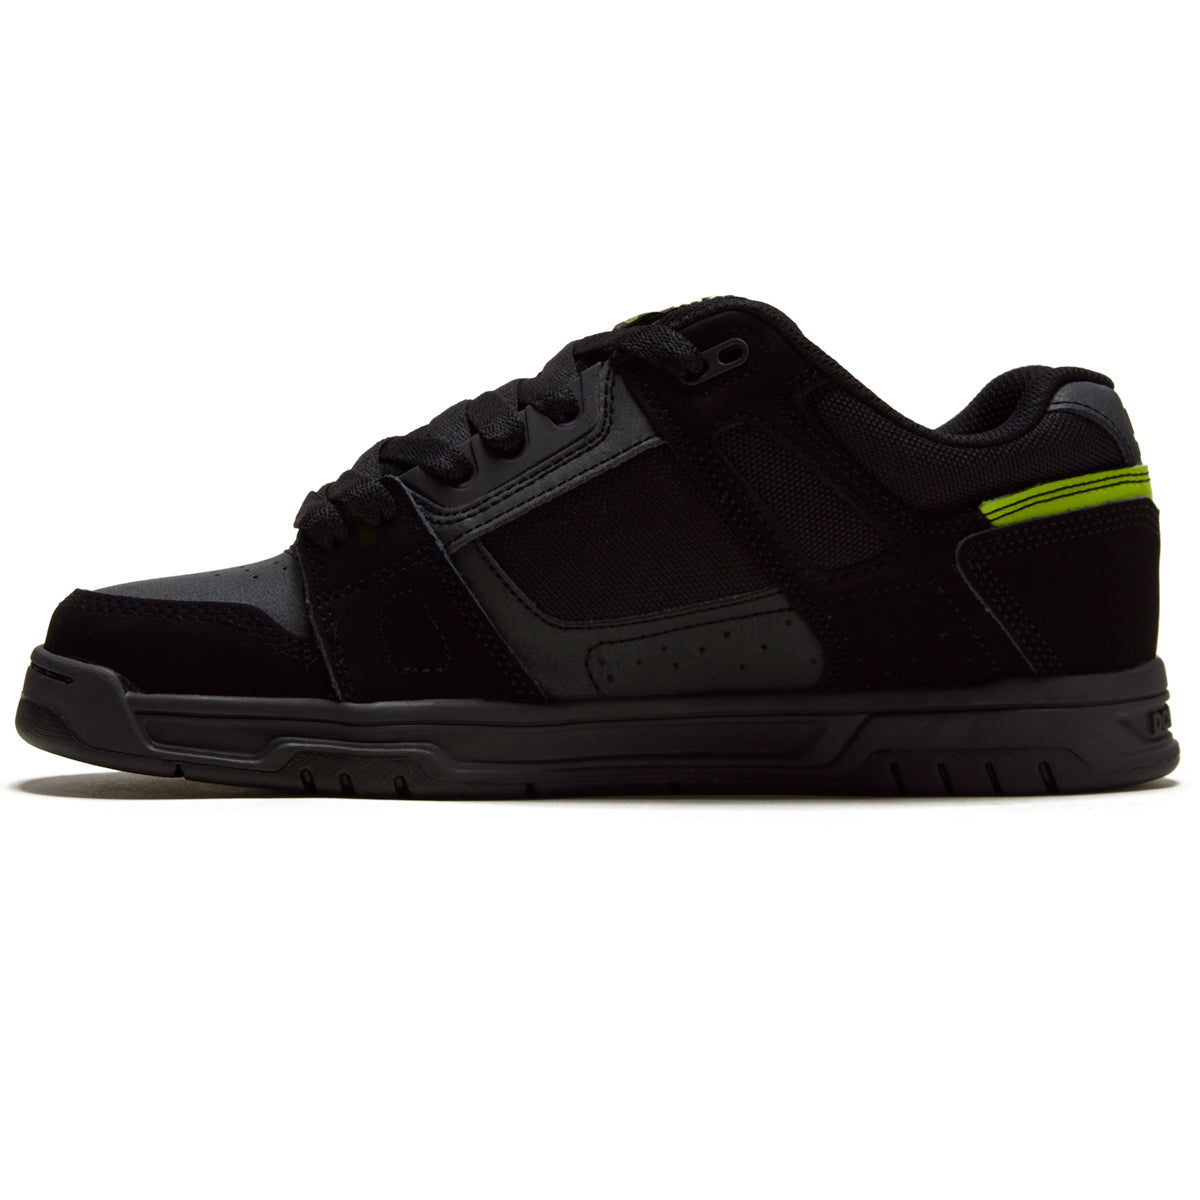 DC Stag Shoes - Black/Lime Green image 2